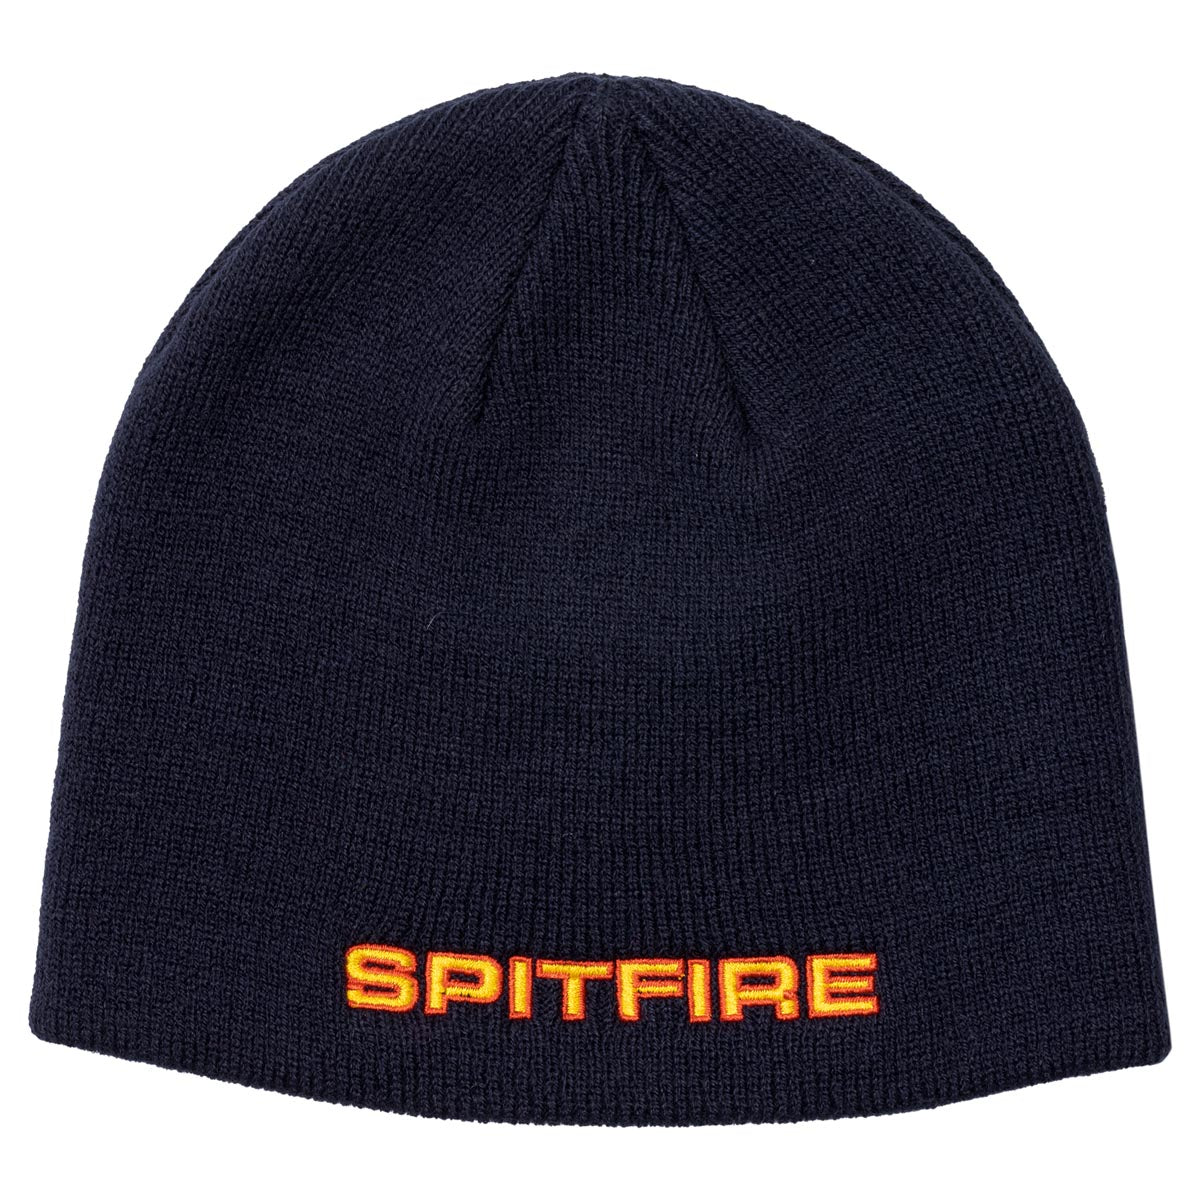 Spitfire Classic 87 Beanie - Navy/Gold/Red image 1